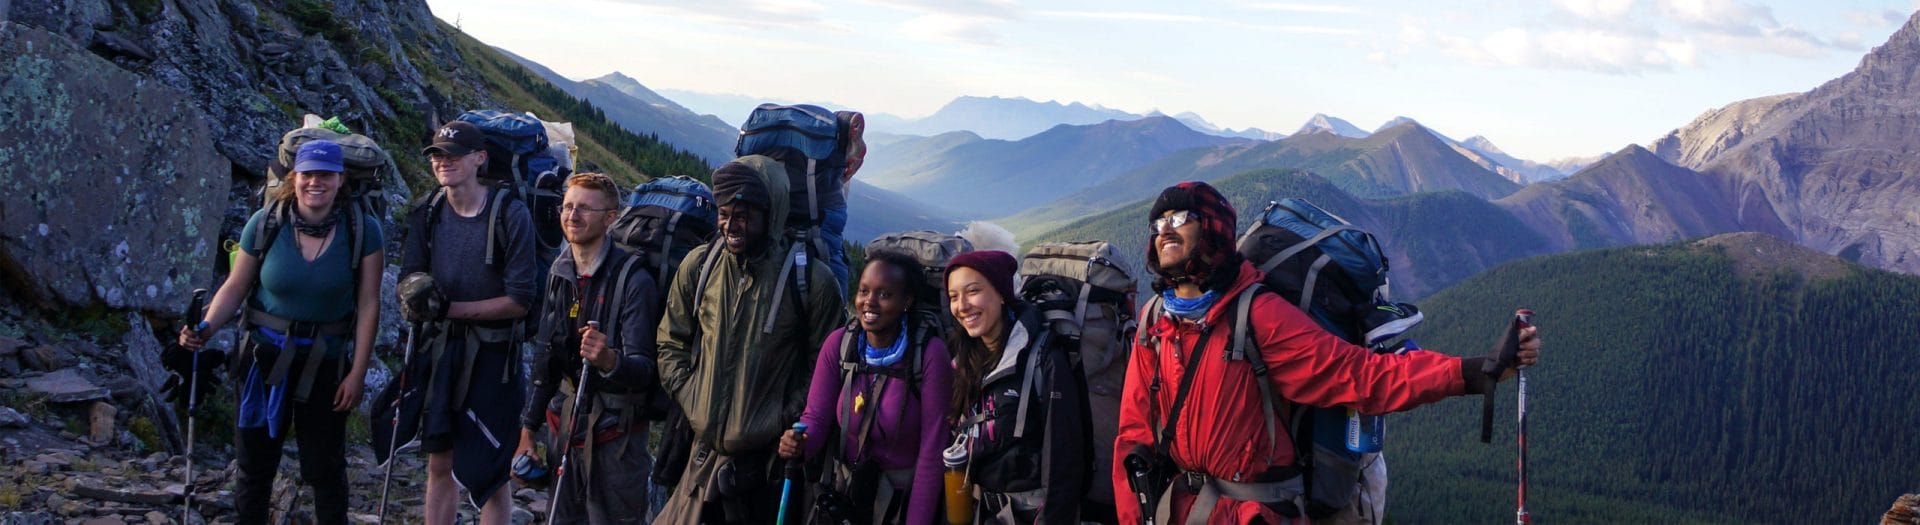 Image of a group of hikers in front of a mountian range